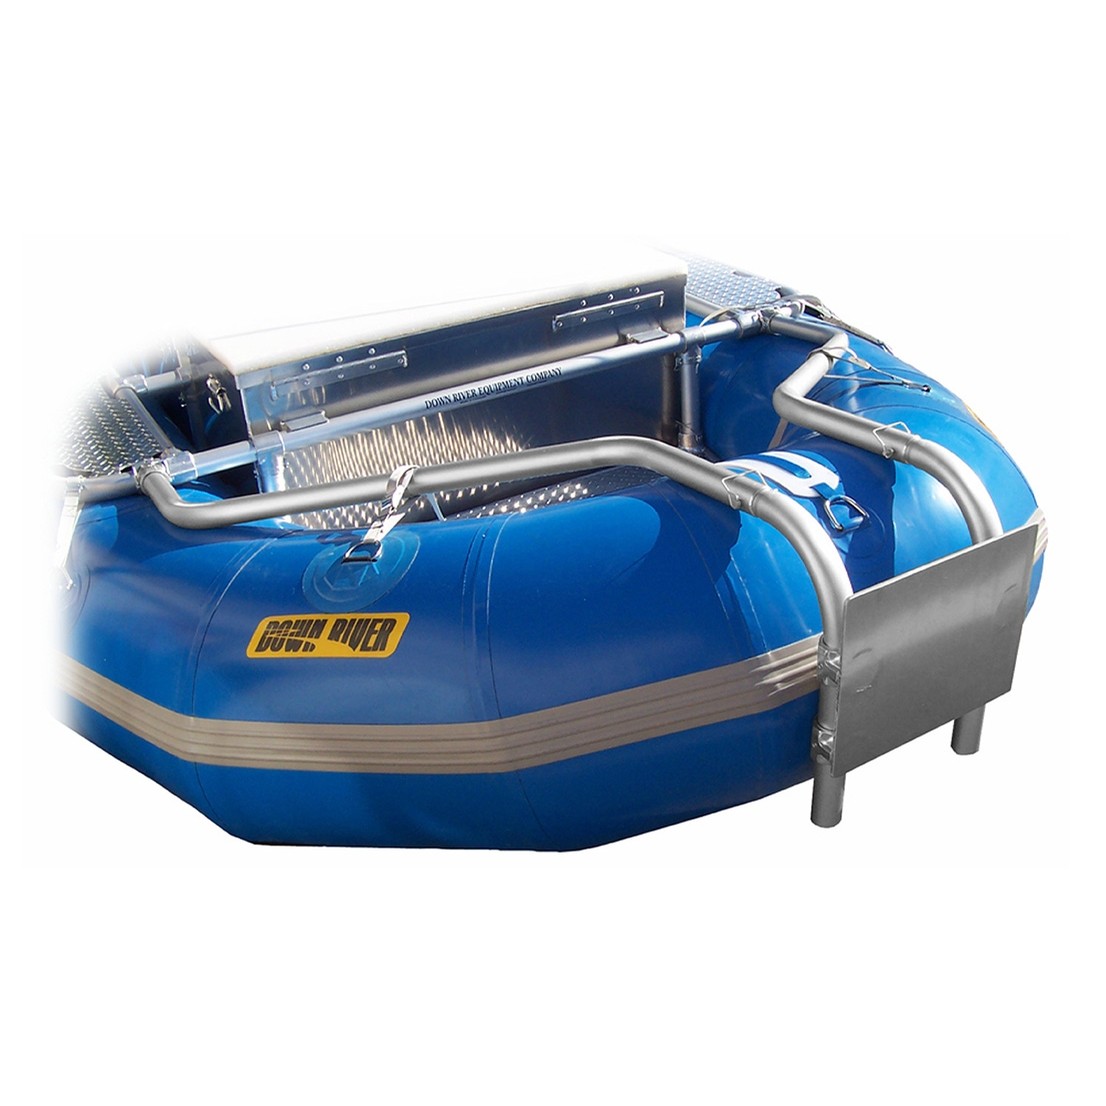 https://www.companybe.com/DownRiverEquipment/product_photos/rd_images/rd_Down-River-Equipment-Motor-Mount-with-Transom-Raft.jpg